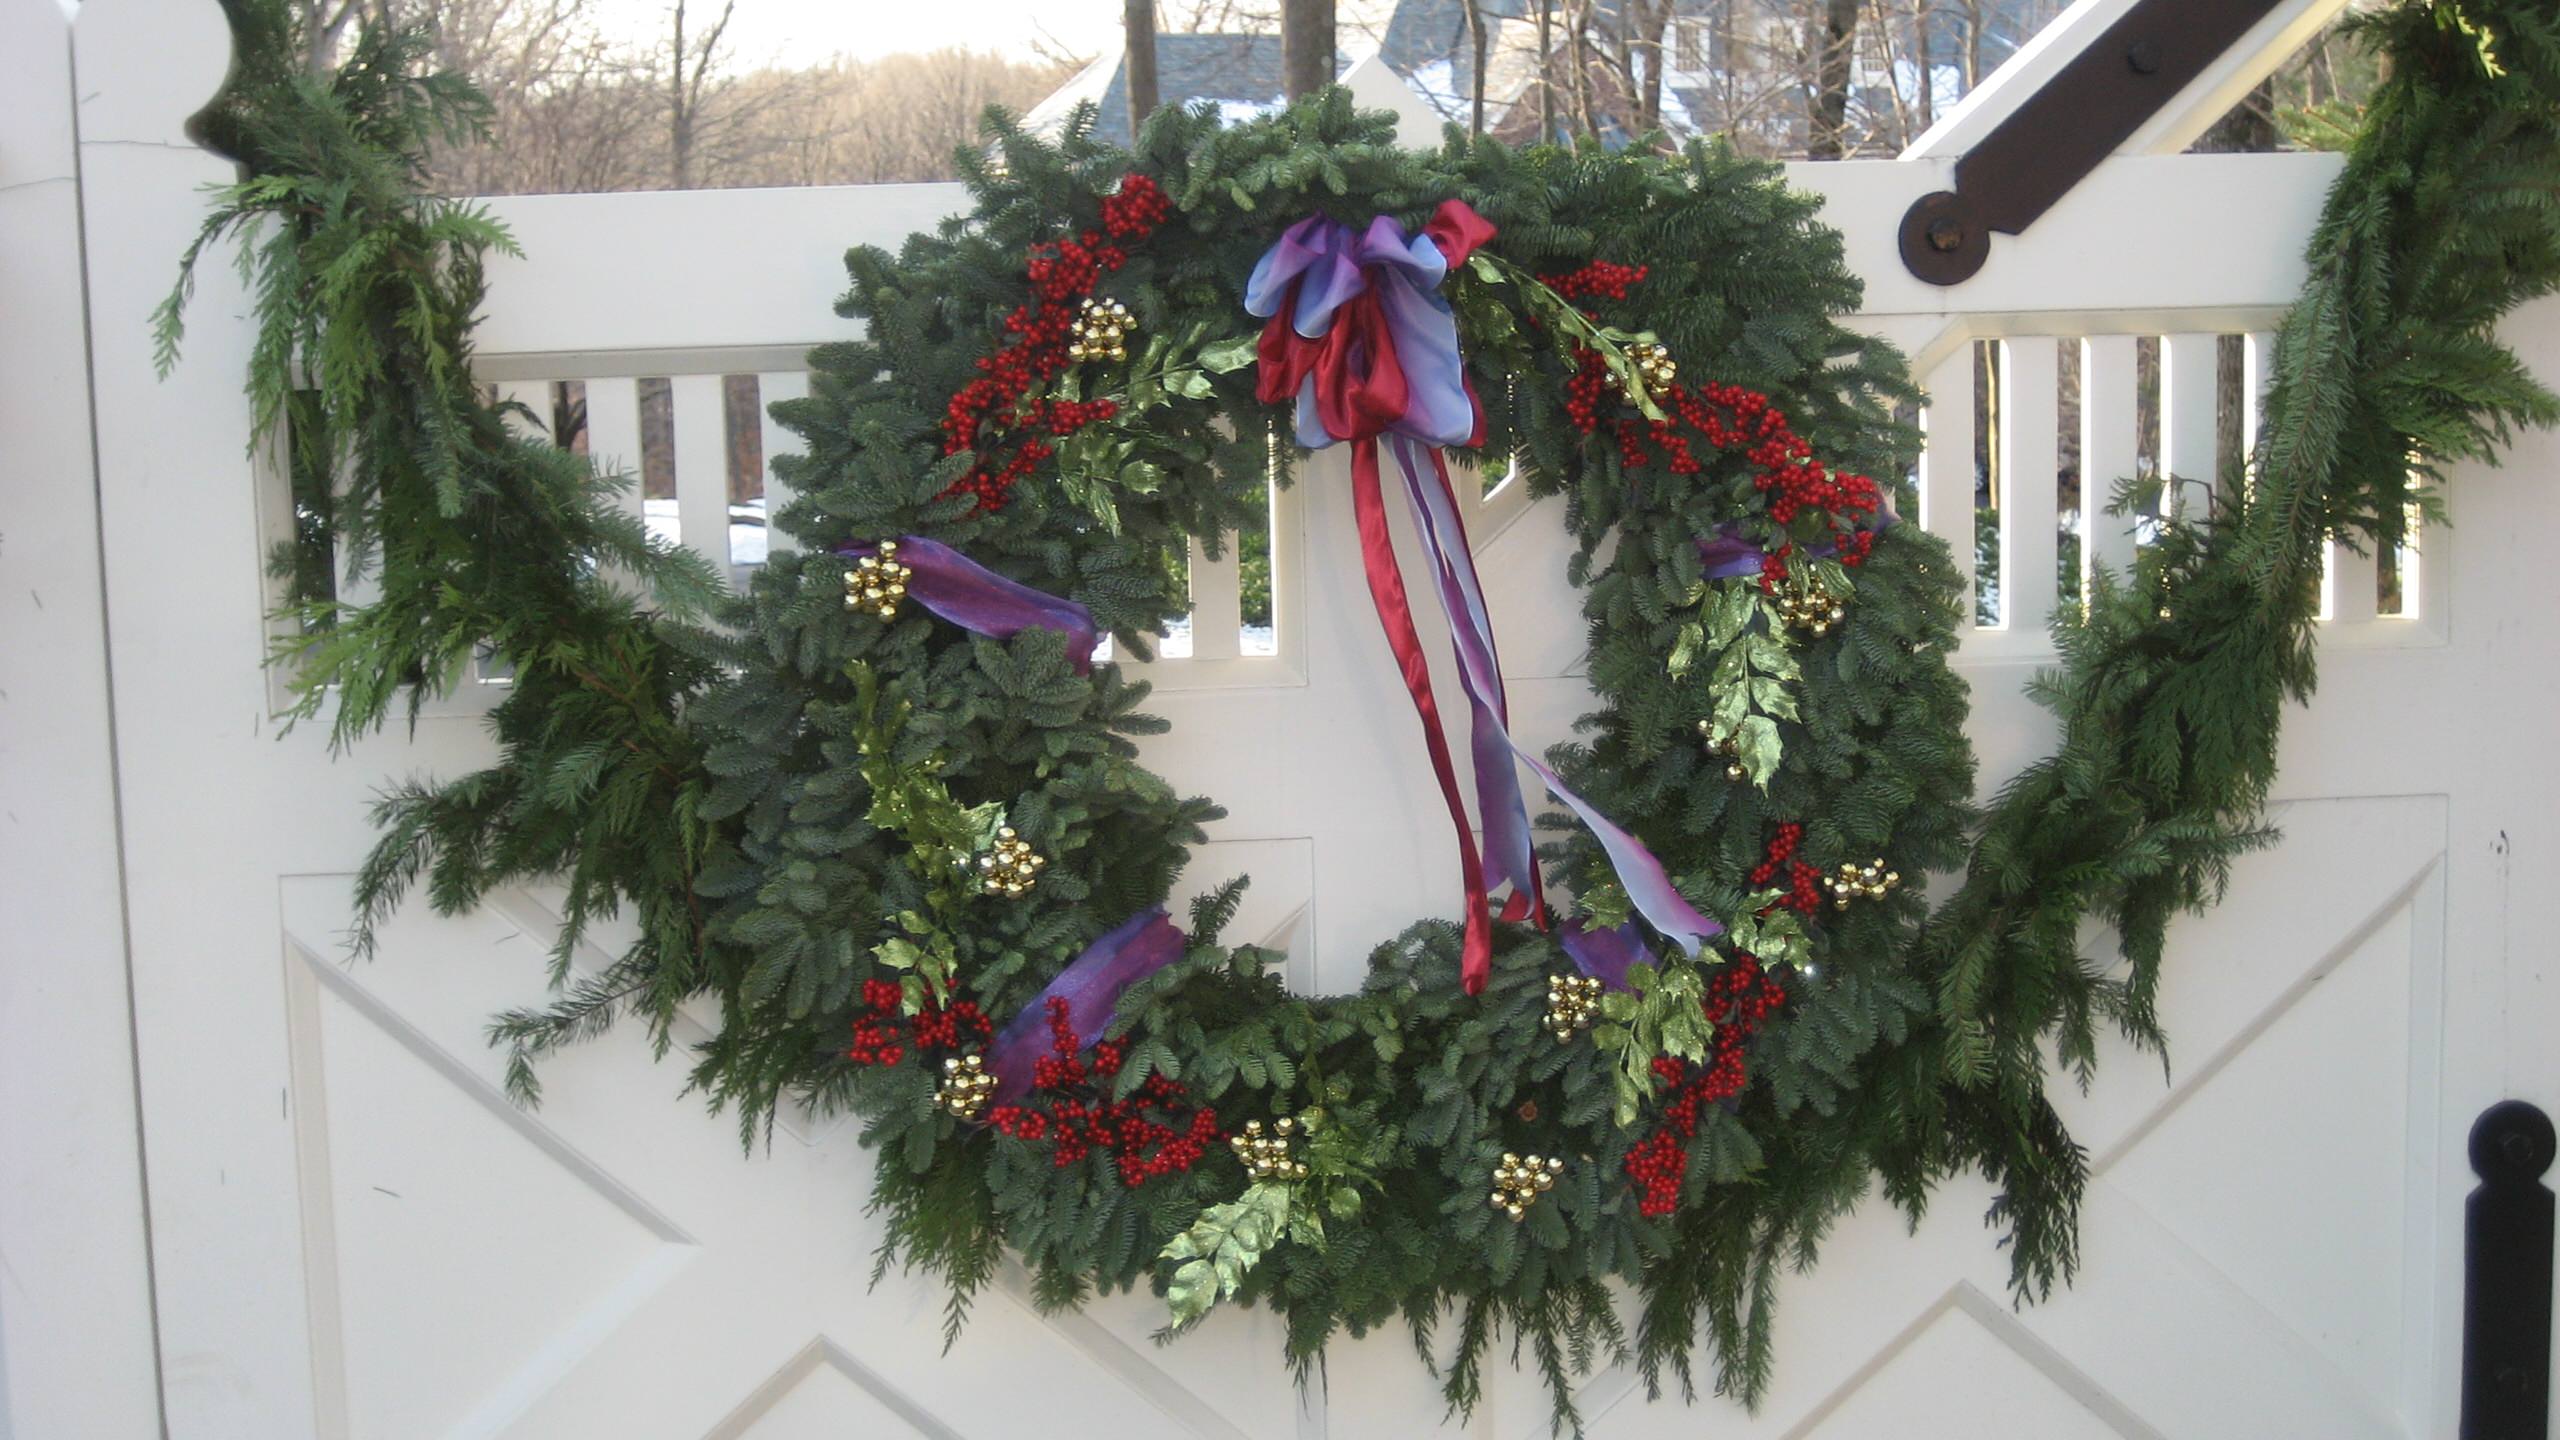 Christmas Decorations, Wreaths, Trees and Outdoor Lights